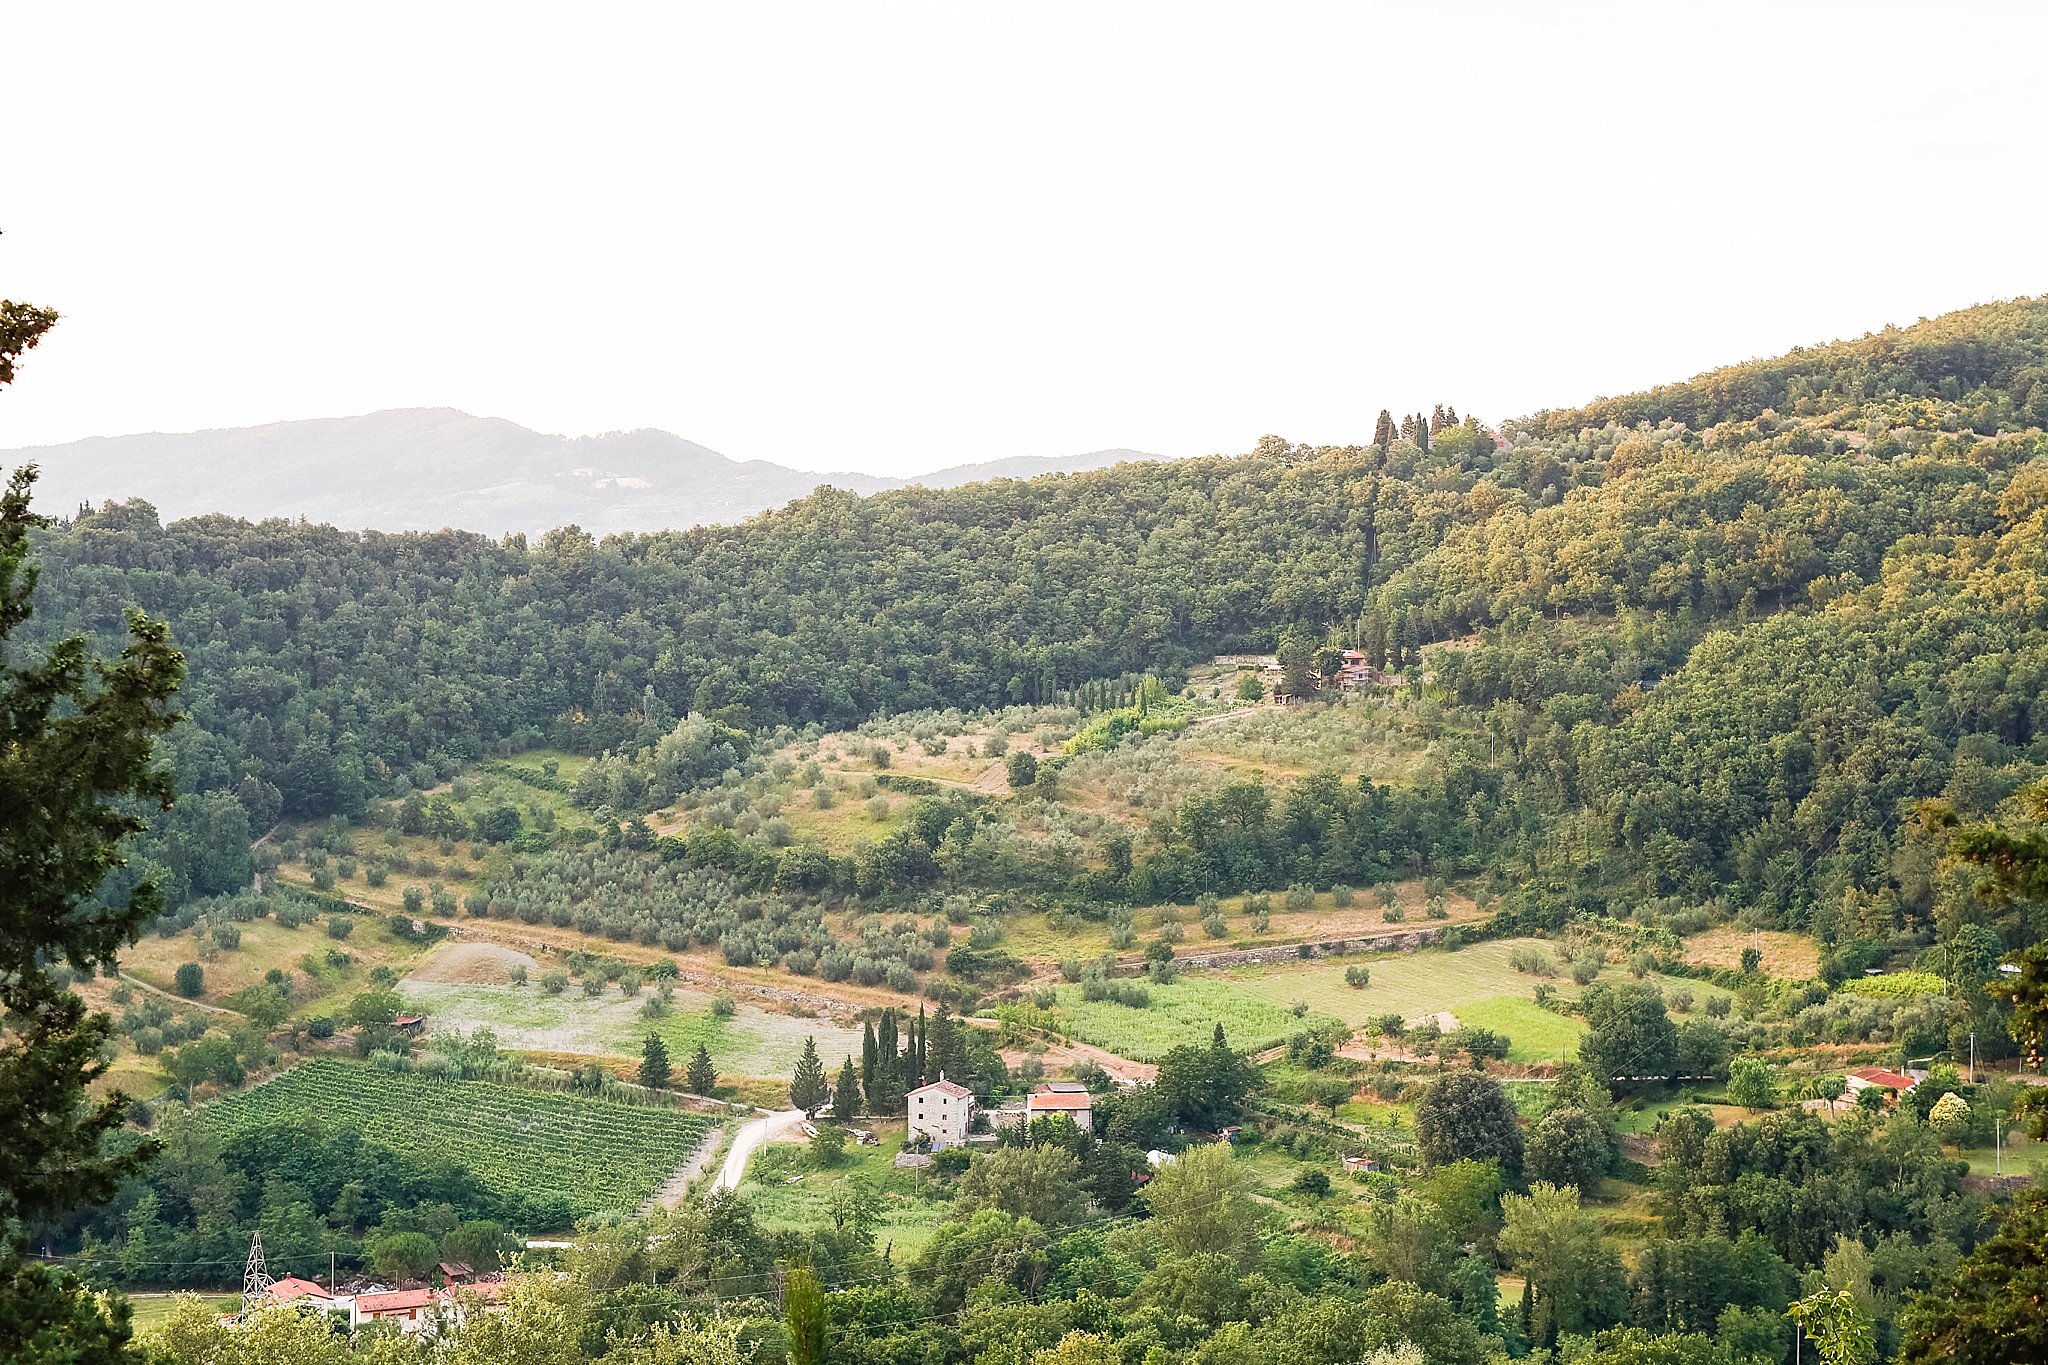 kristen_dyer_photography_italy_homeaway (27 of 28).jpg